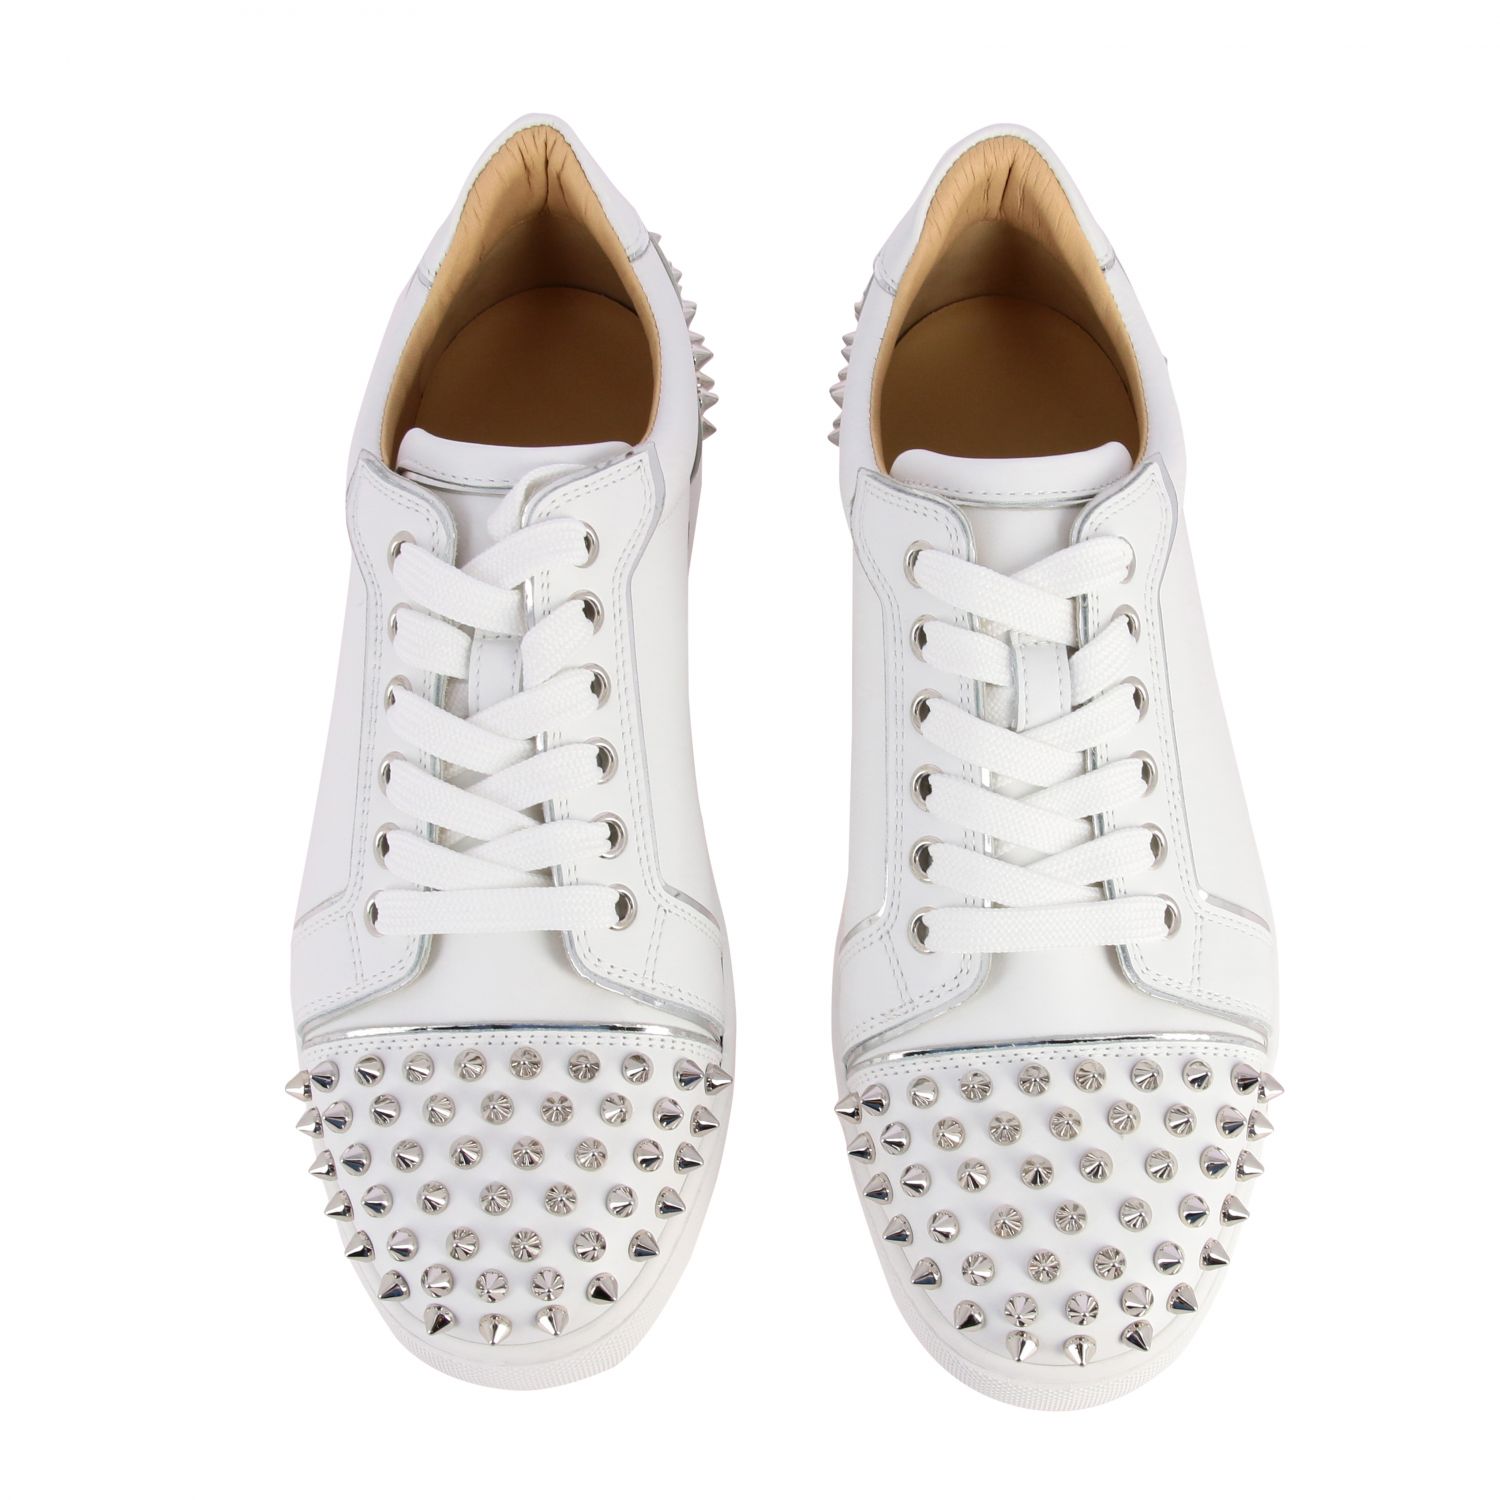 Christian Louboutin Vieira spikes sneakers in studded leather